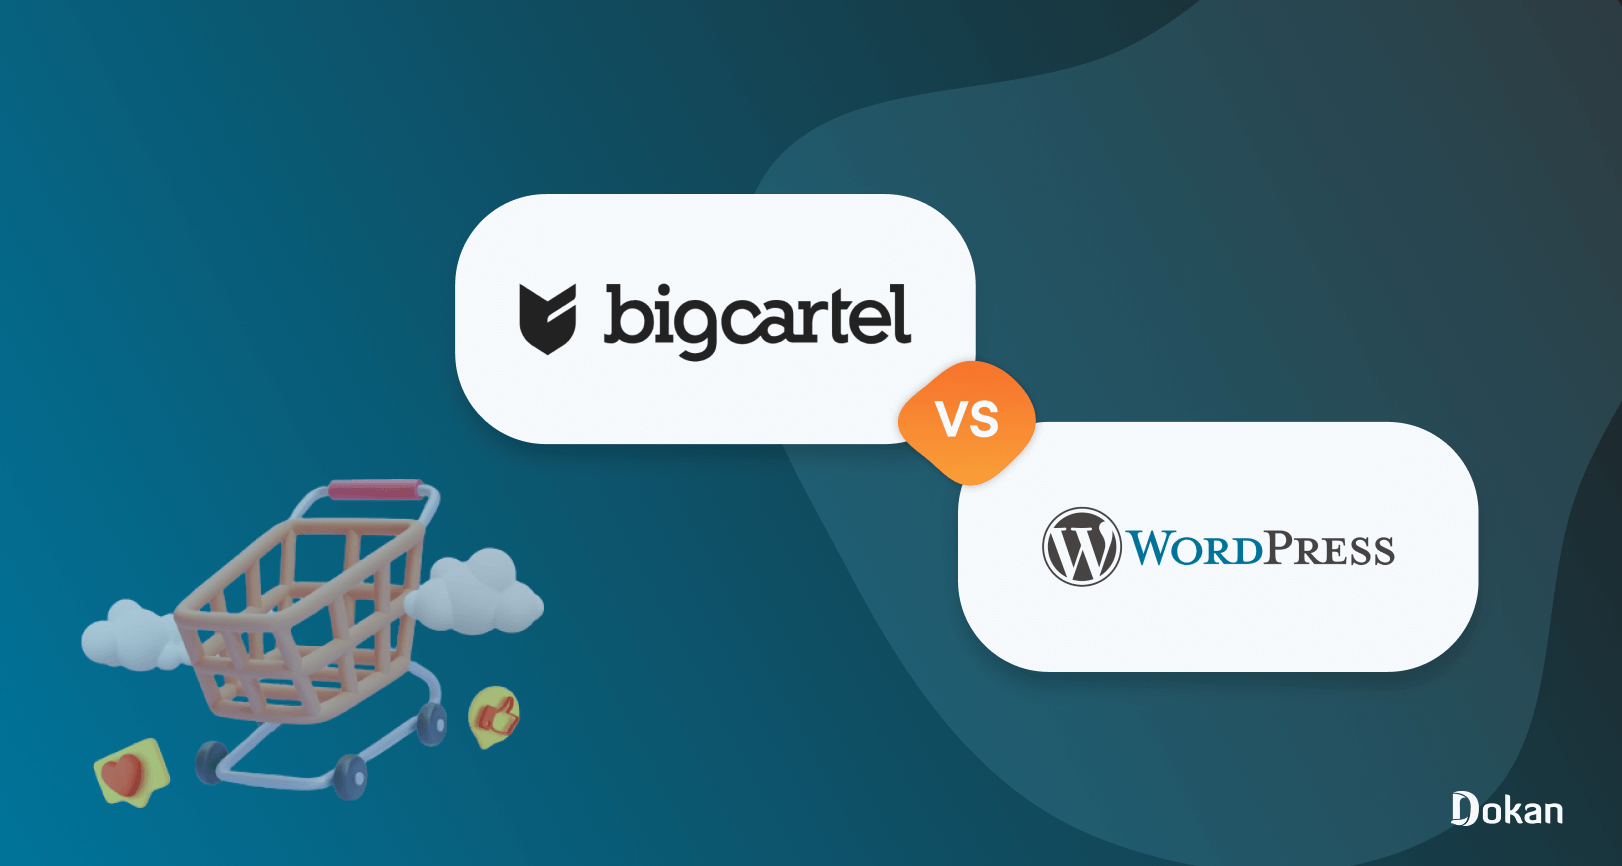 This is the feature image of the blog - Big Cartel vs WordPress for eCommerce